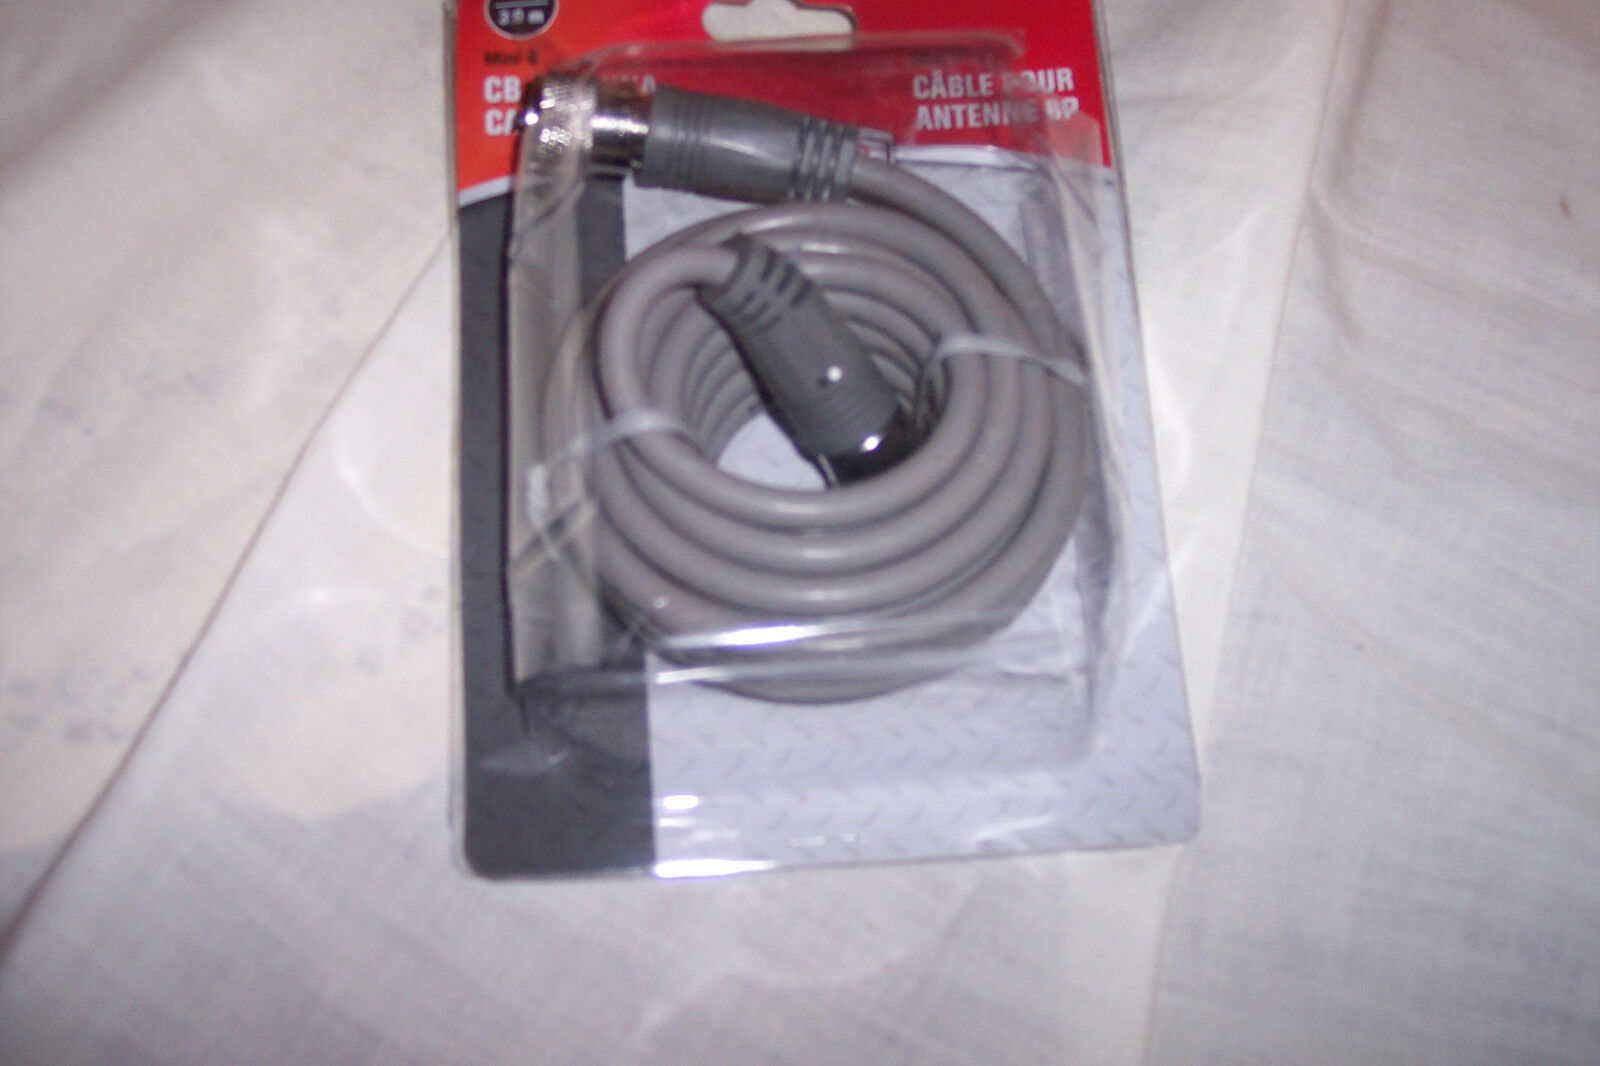 12 ft. cb antenna cable